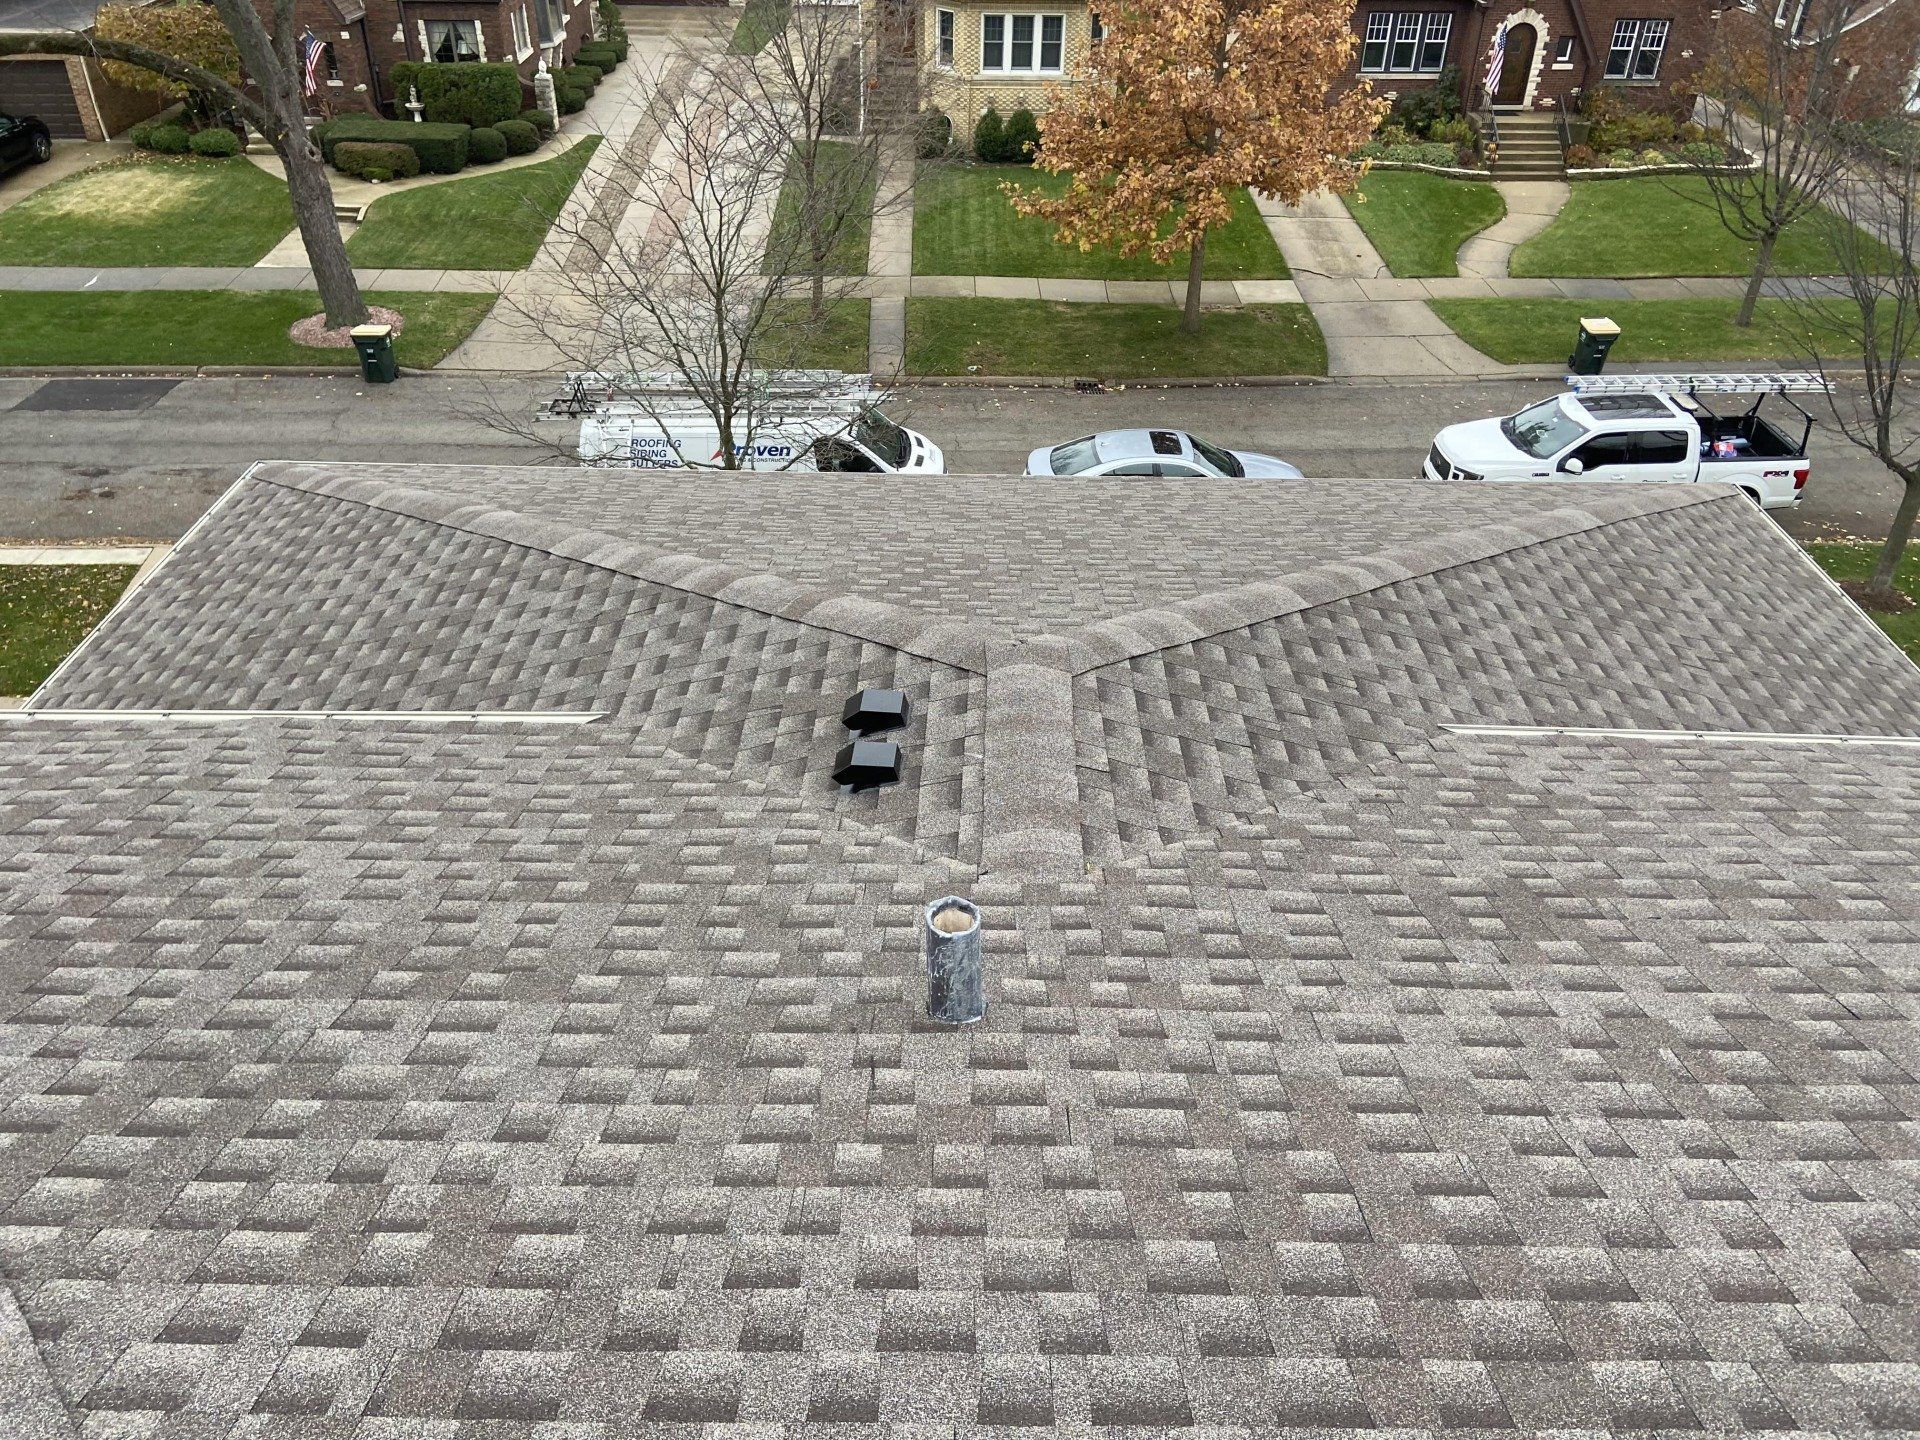 Birdseye view of a Roof